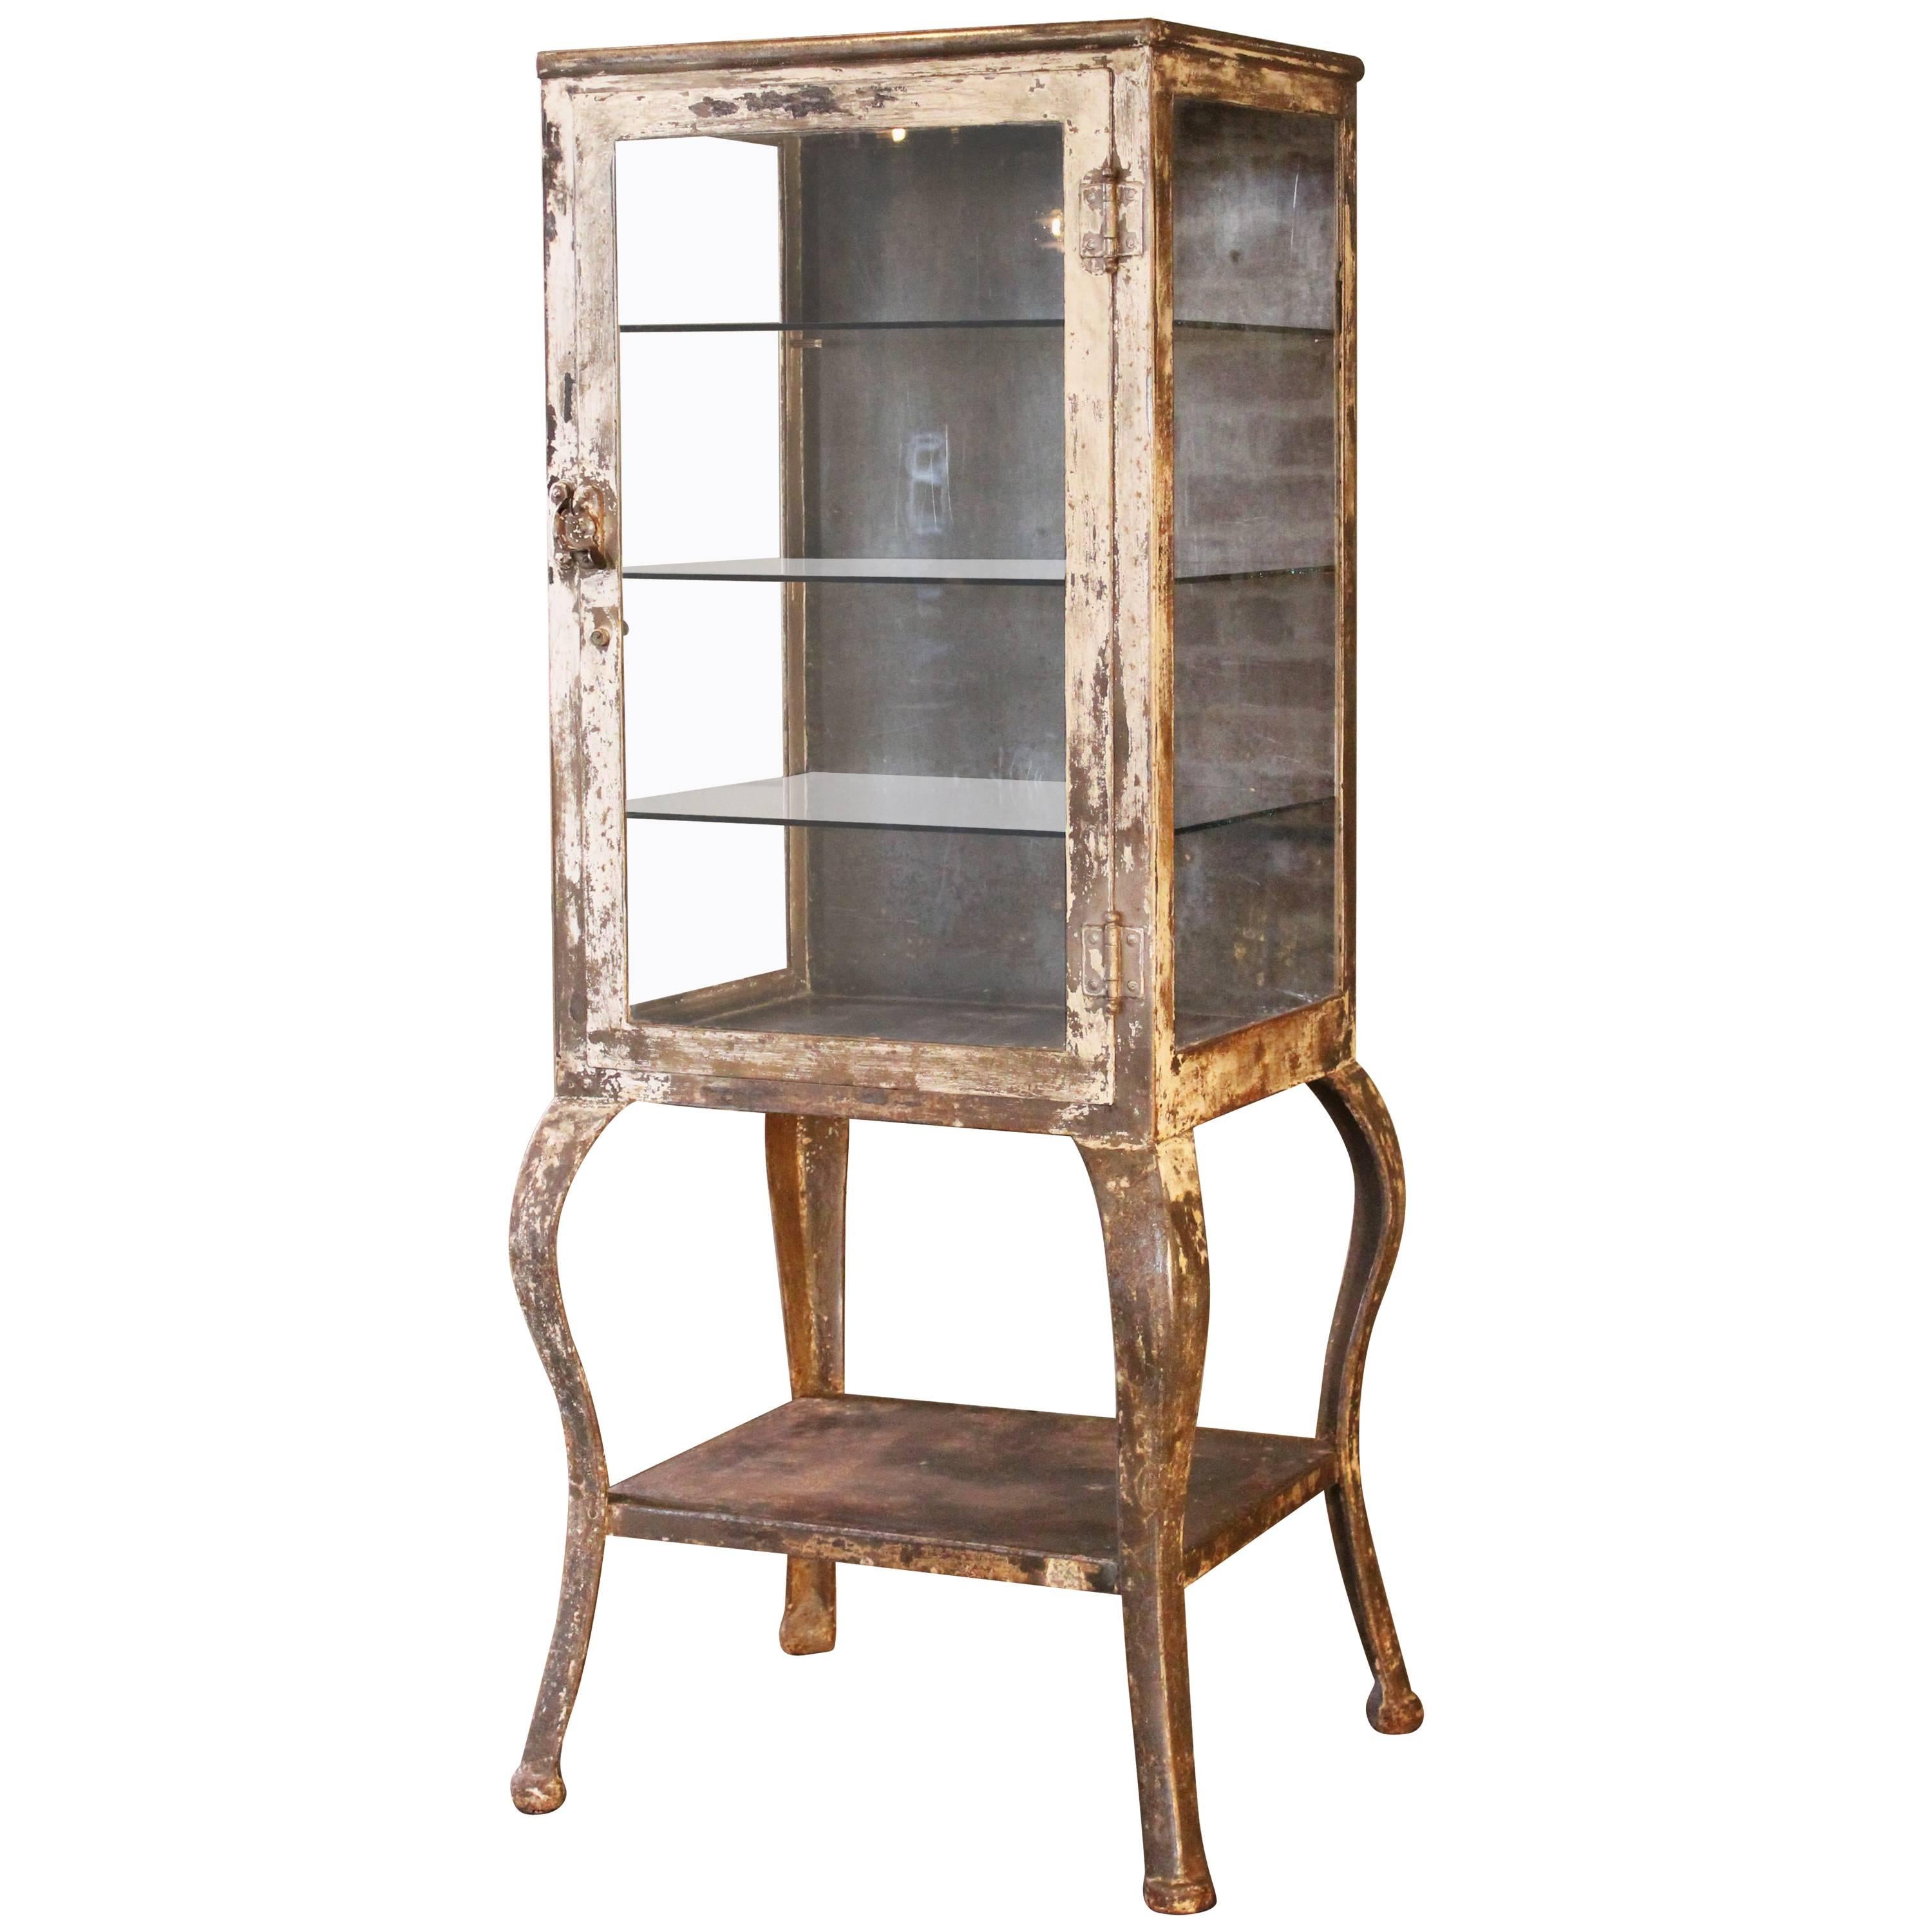 Antique Medical Cabinet with Cabriole Legs, Steel and Glass Apothecary